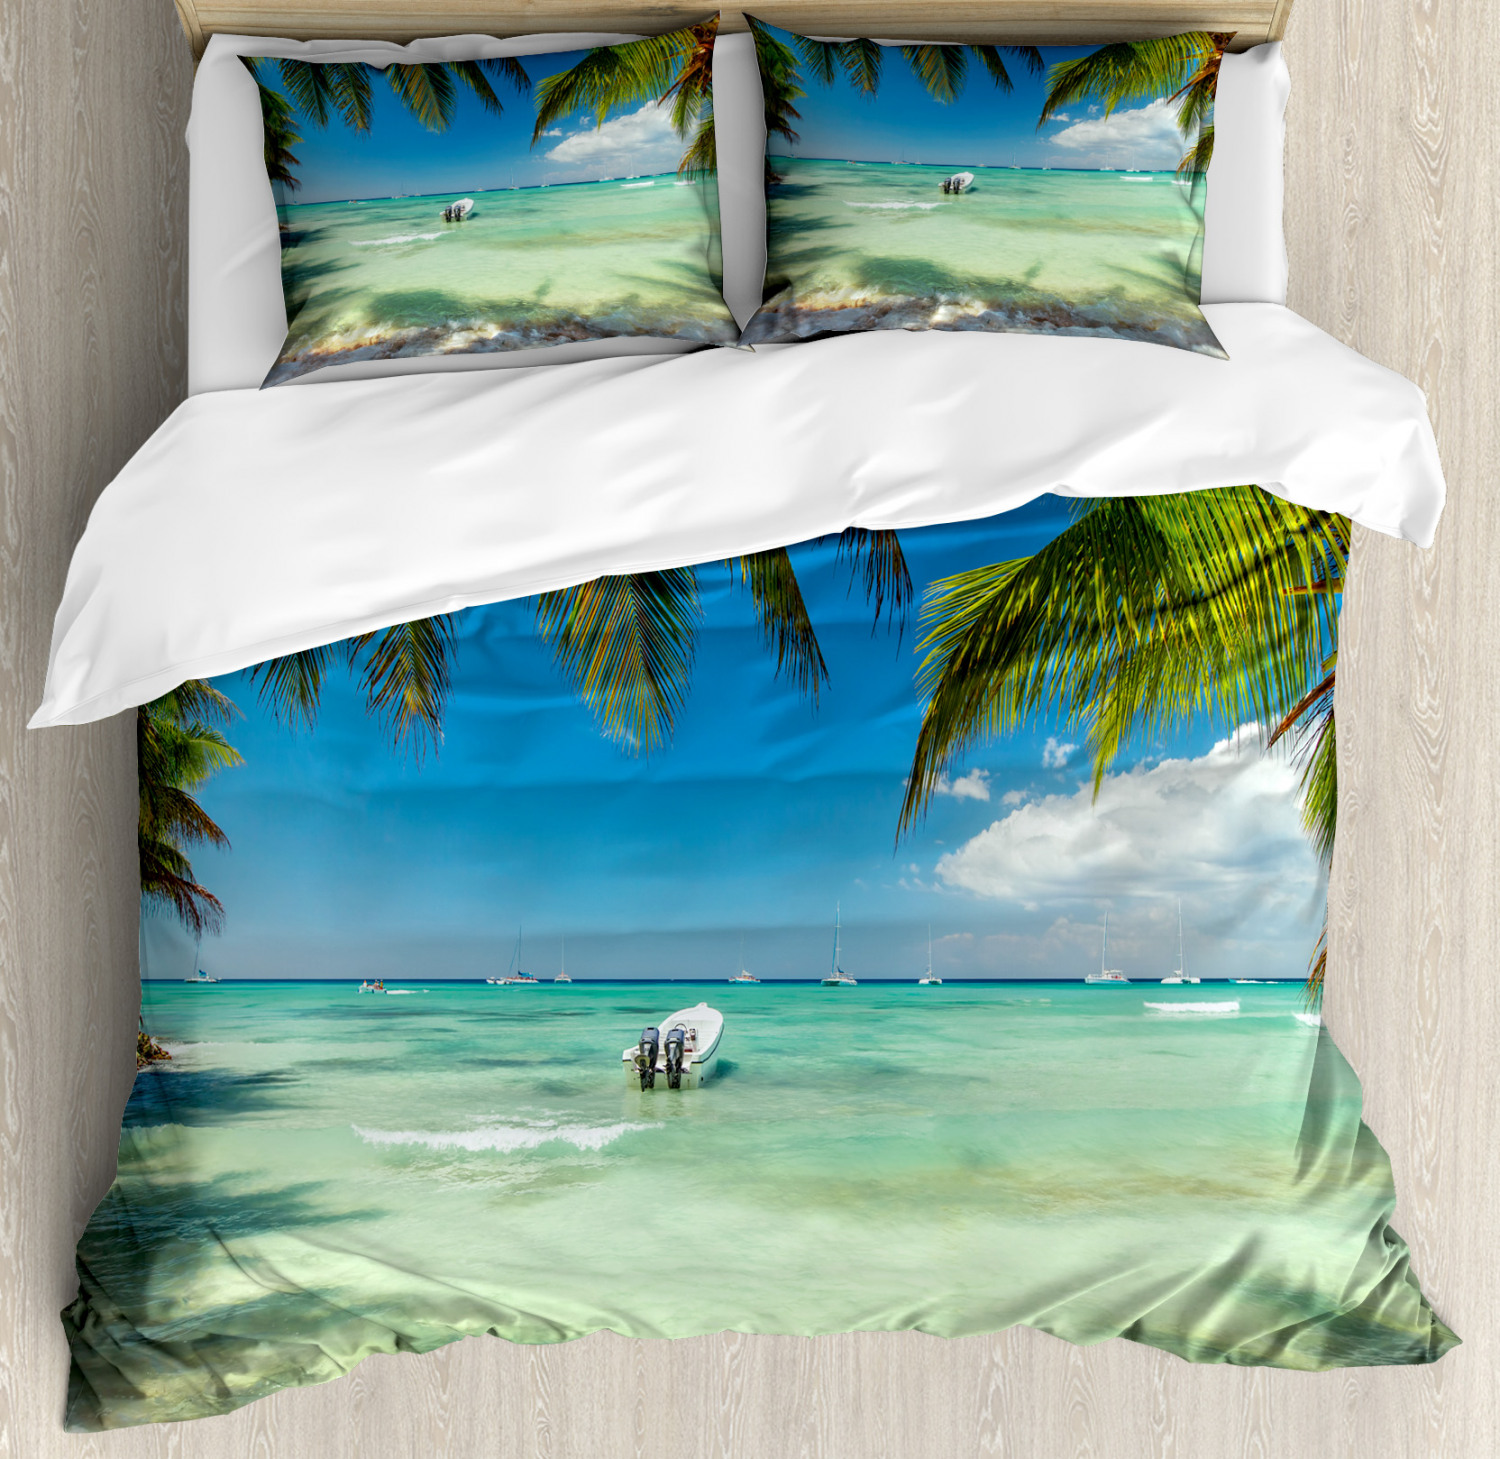 Tropical Duvet Cover Set With Pillow Shams Surreal Sea Palm Tree